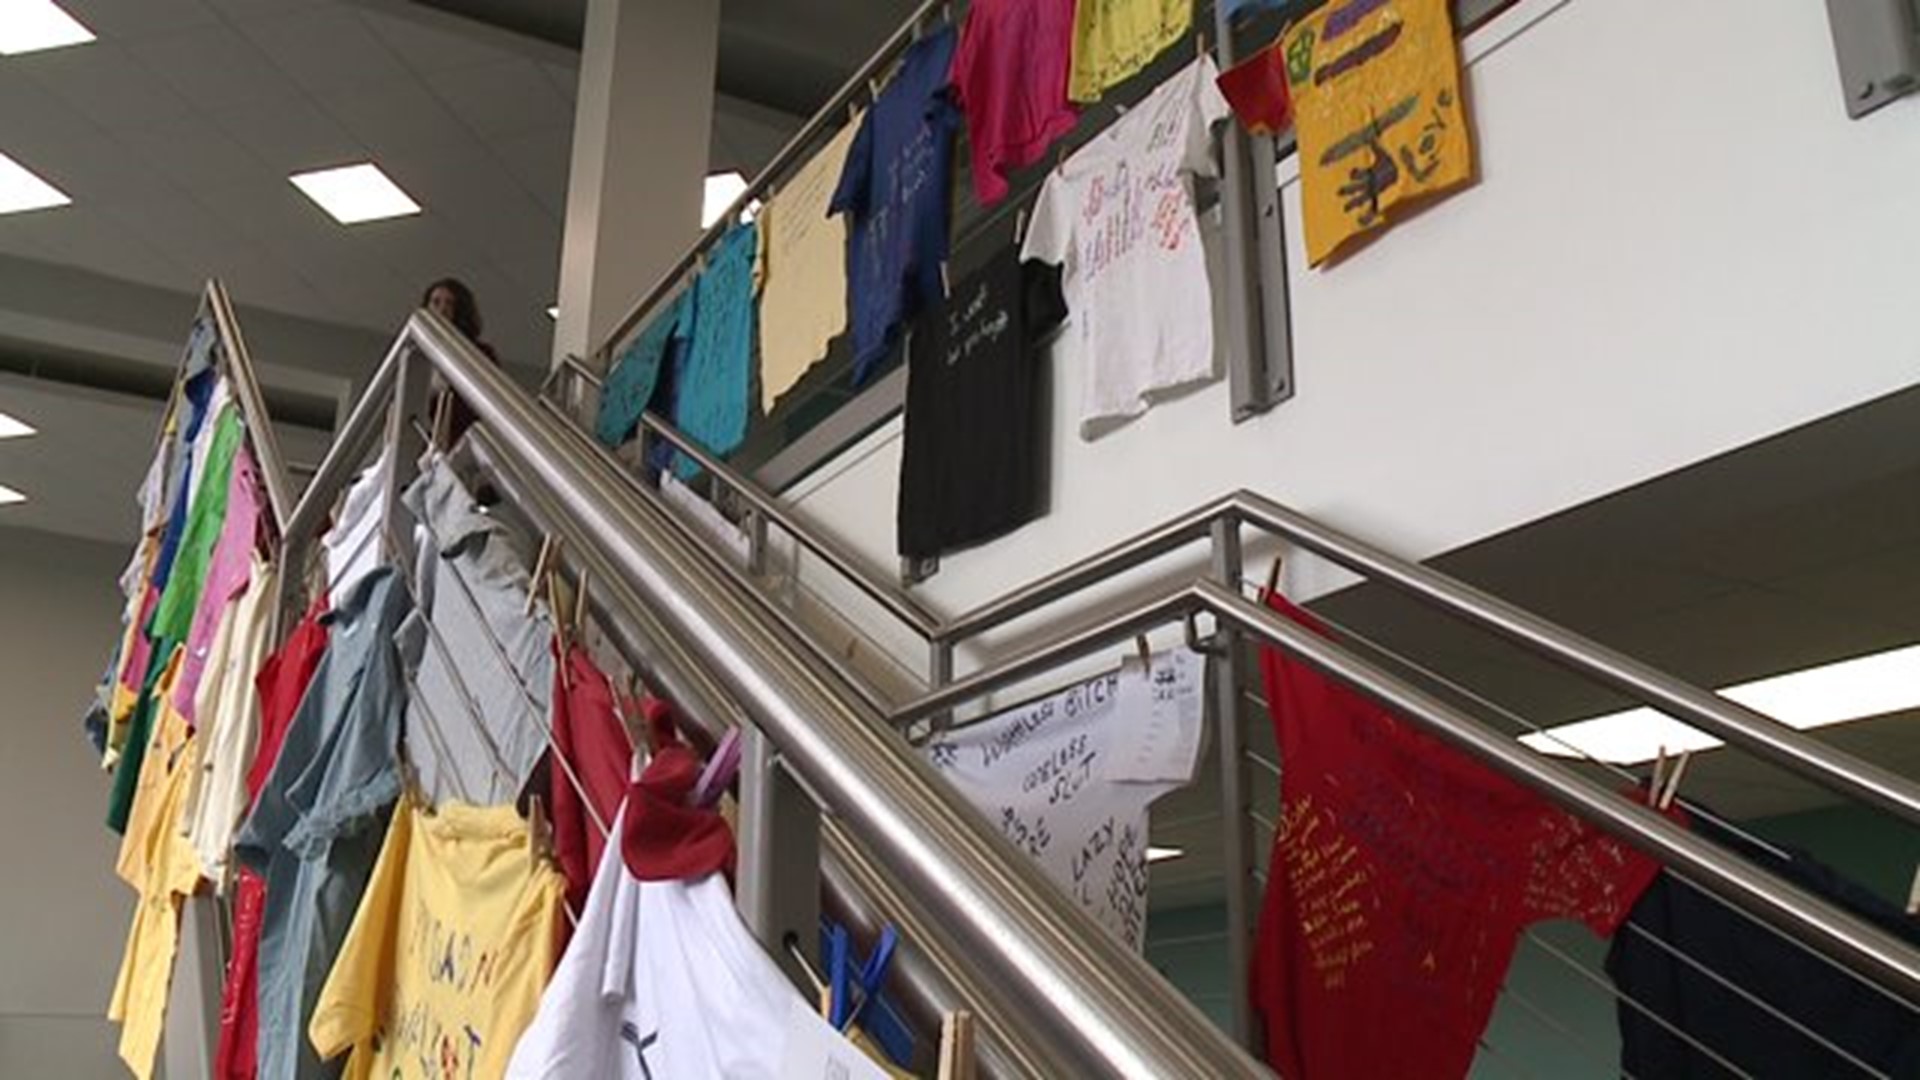 Clothesline Project sends powerful message